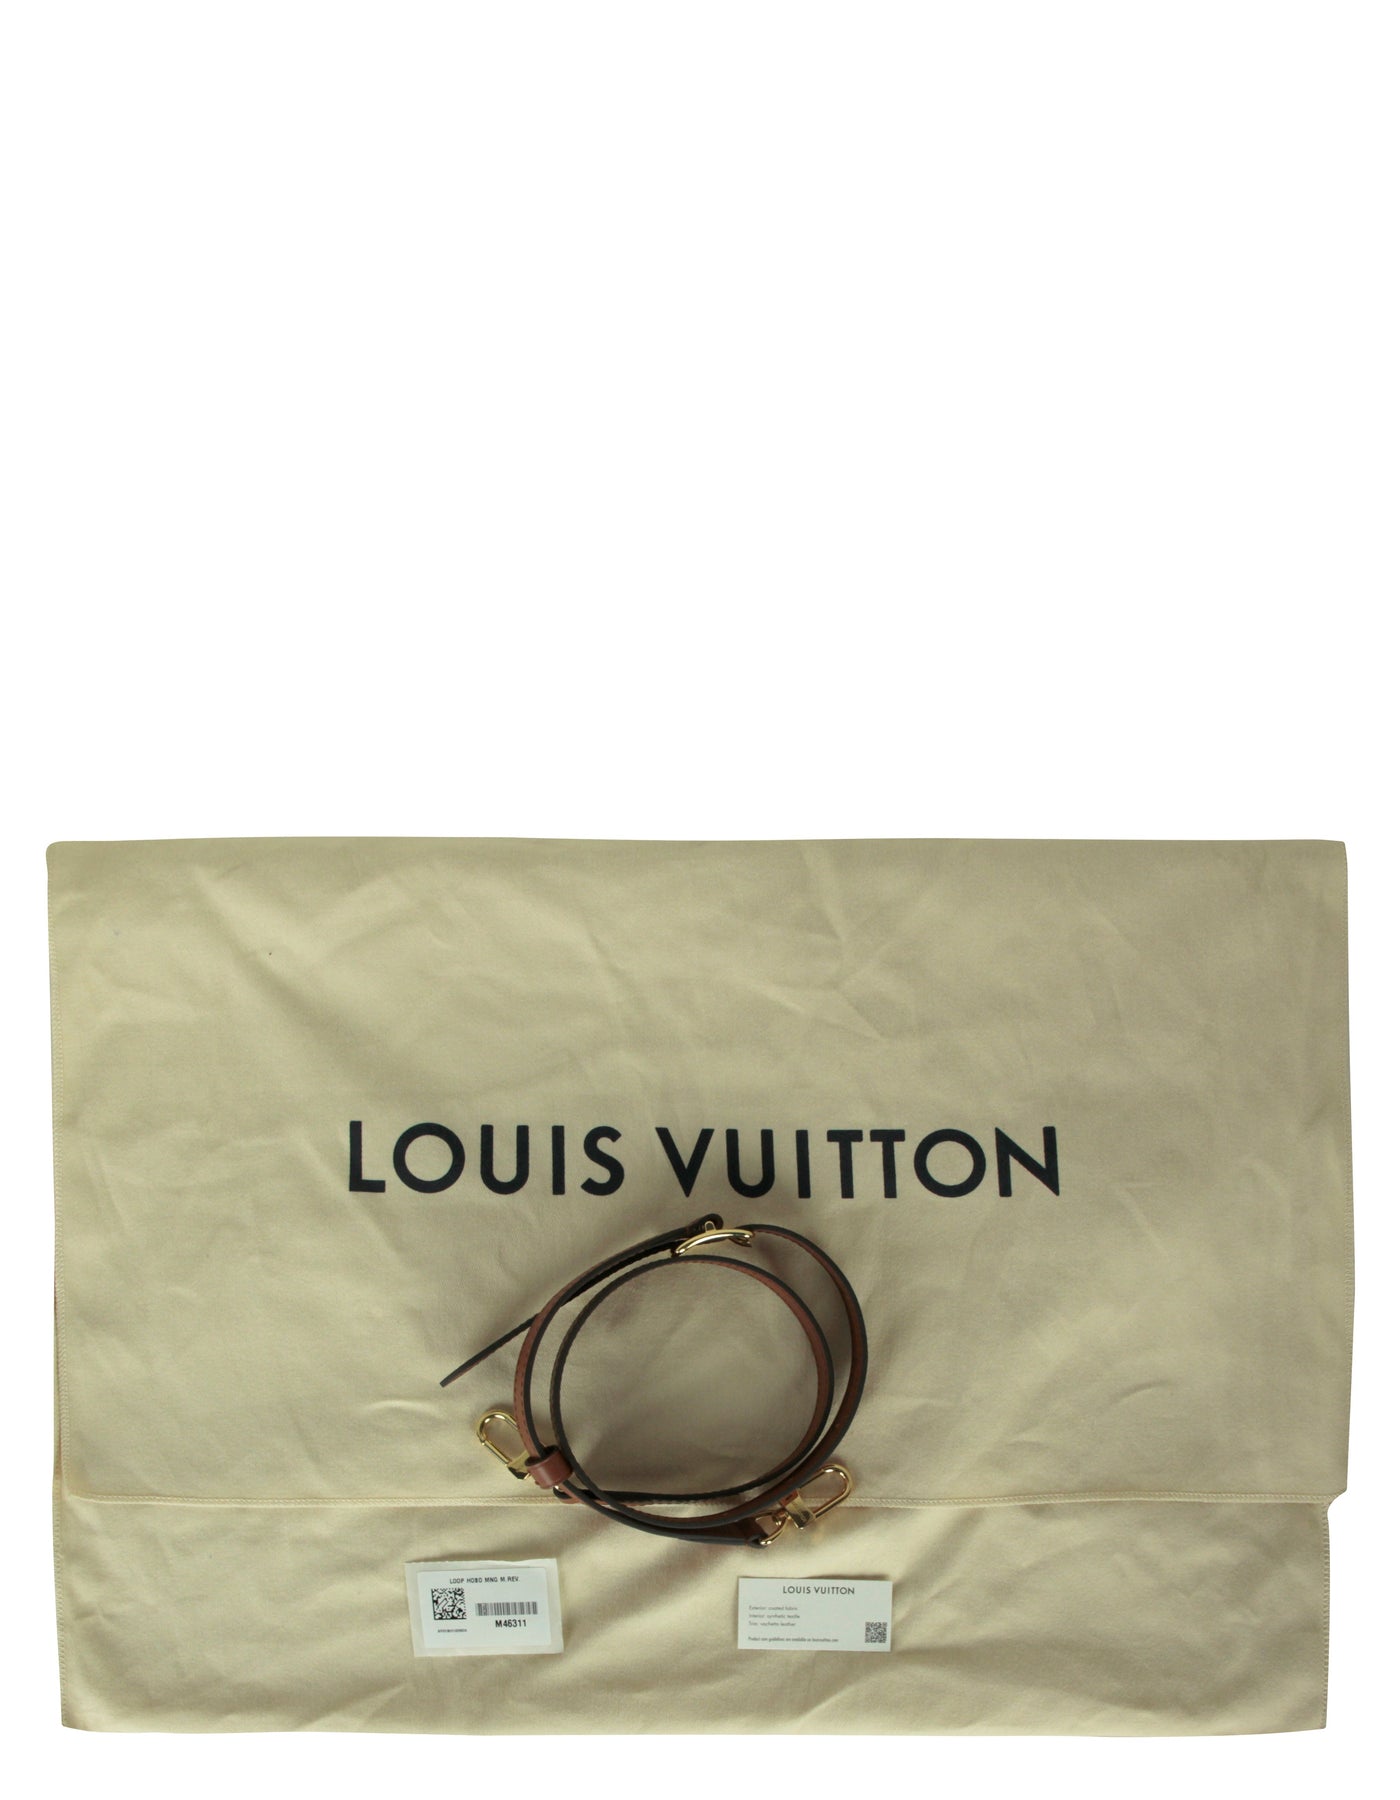 Upsize Your Life With Louis Vuitton's Loop Hobo - BAGAHOLICBOY